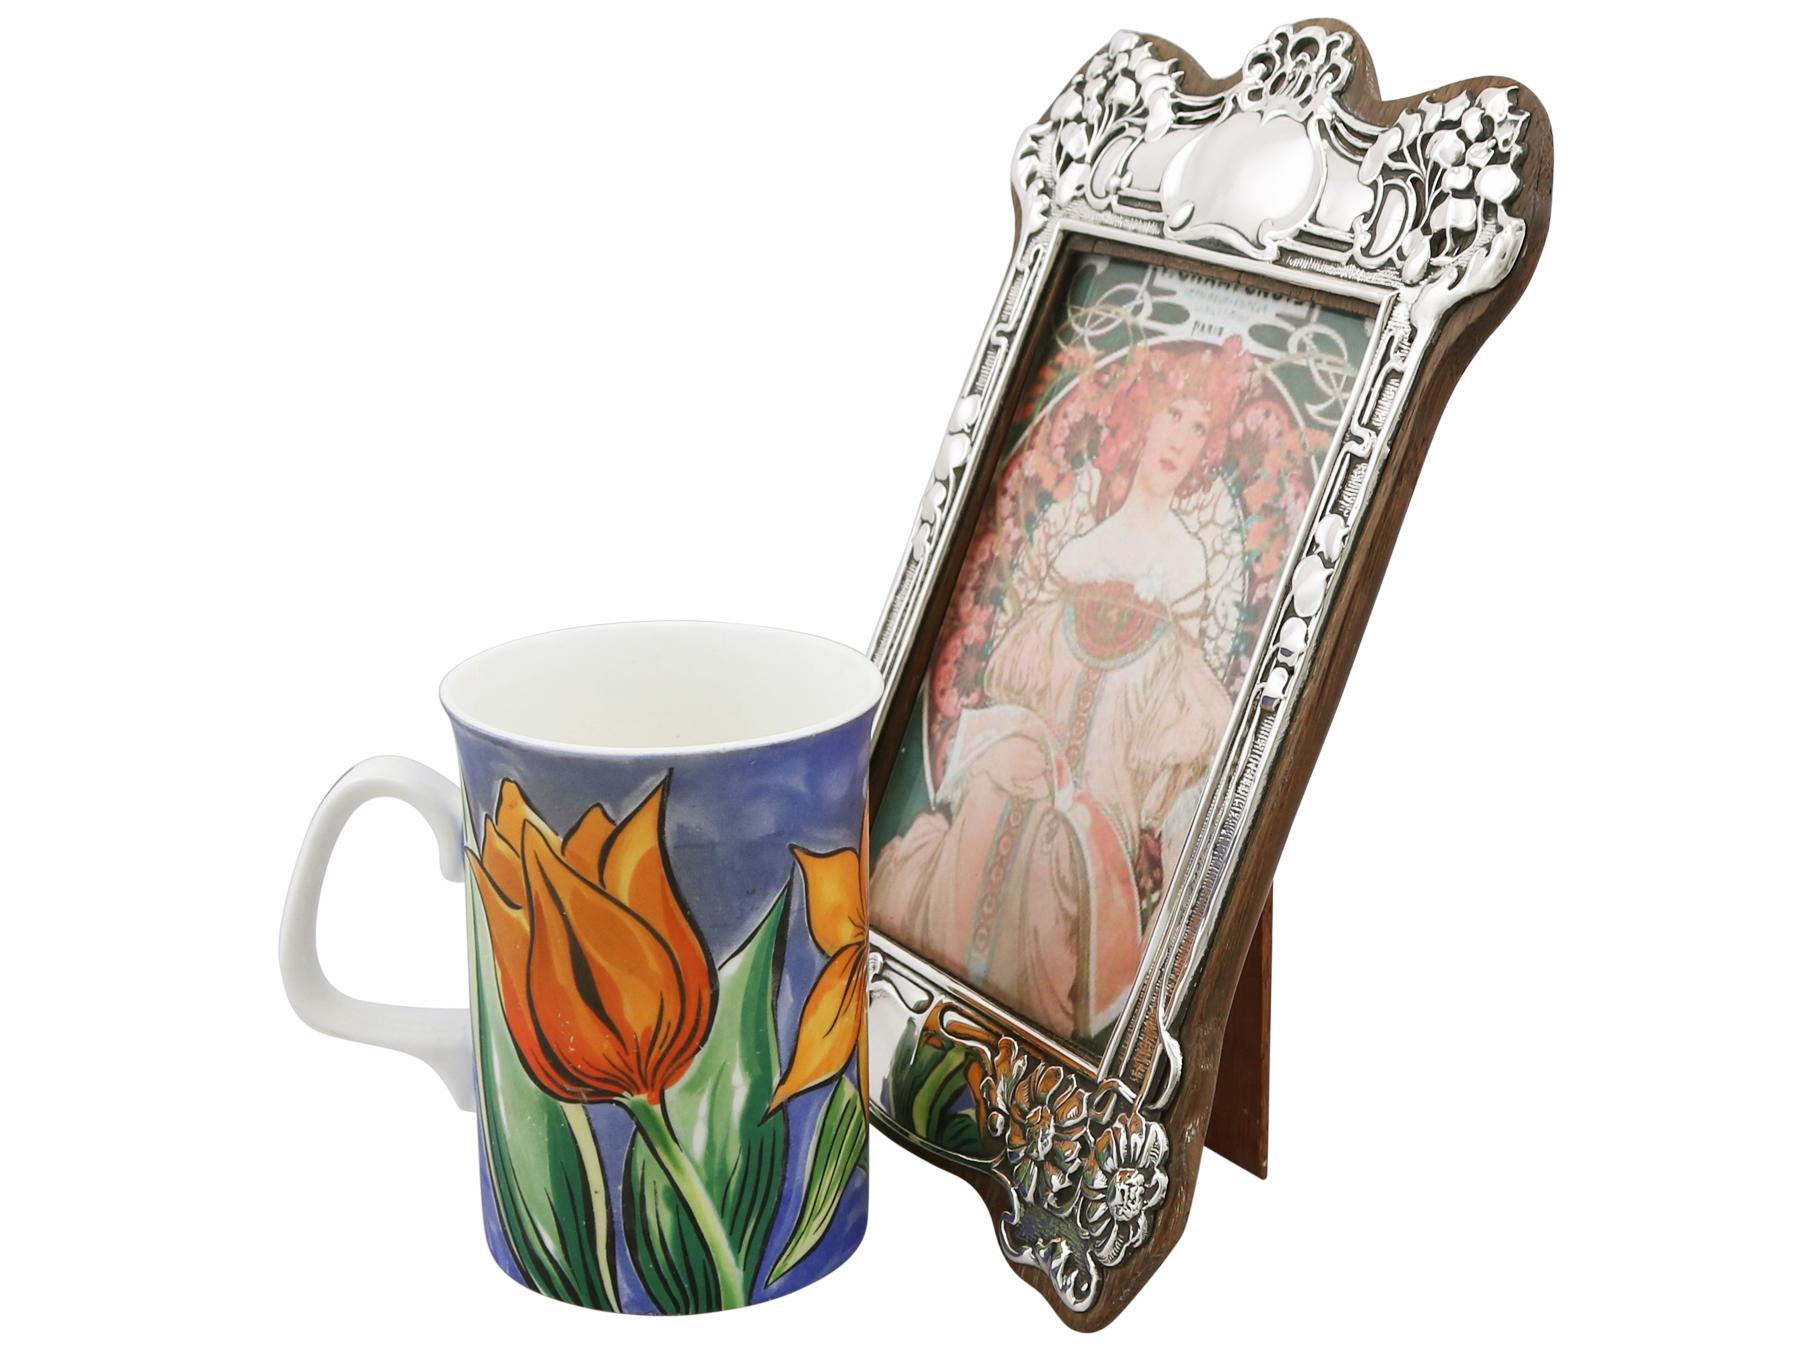 An exceptional, fine and impressive antique Edwardian sterling silver Art Nouveau photograph frame; an addition to our ornamental silverware collection.

This exceptional antique Edwardian sterling silver frame has a rectangular shaped form with a